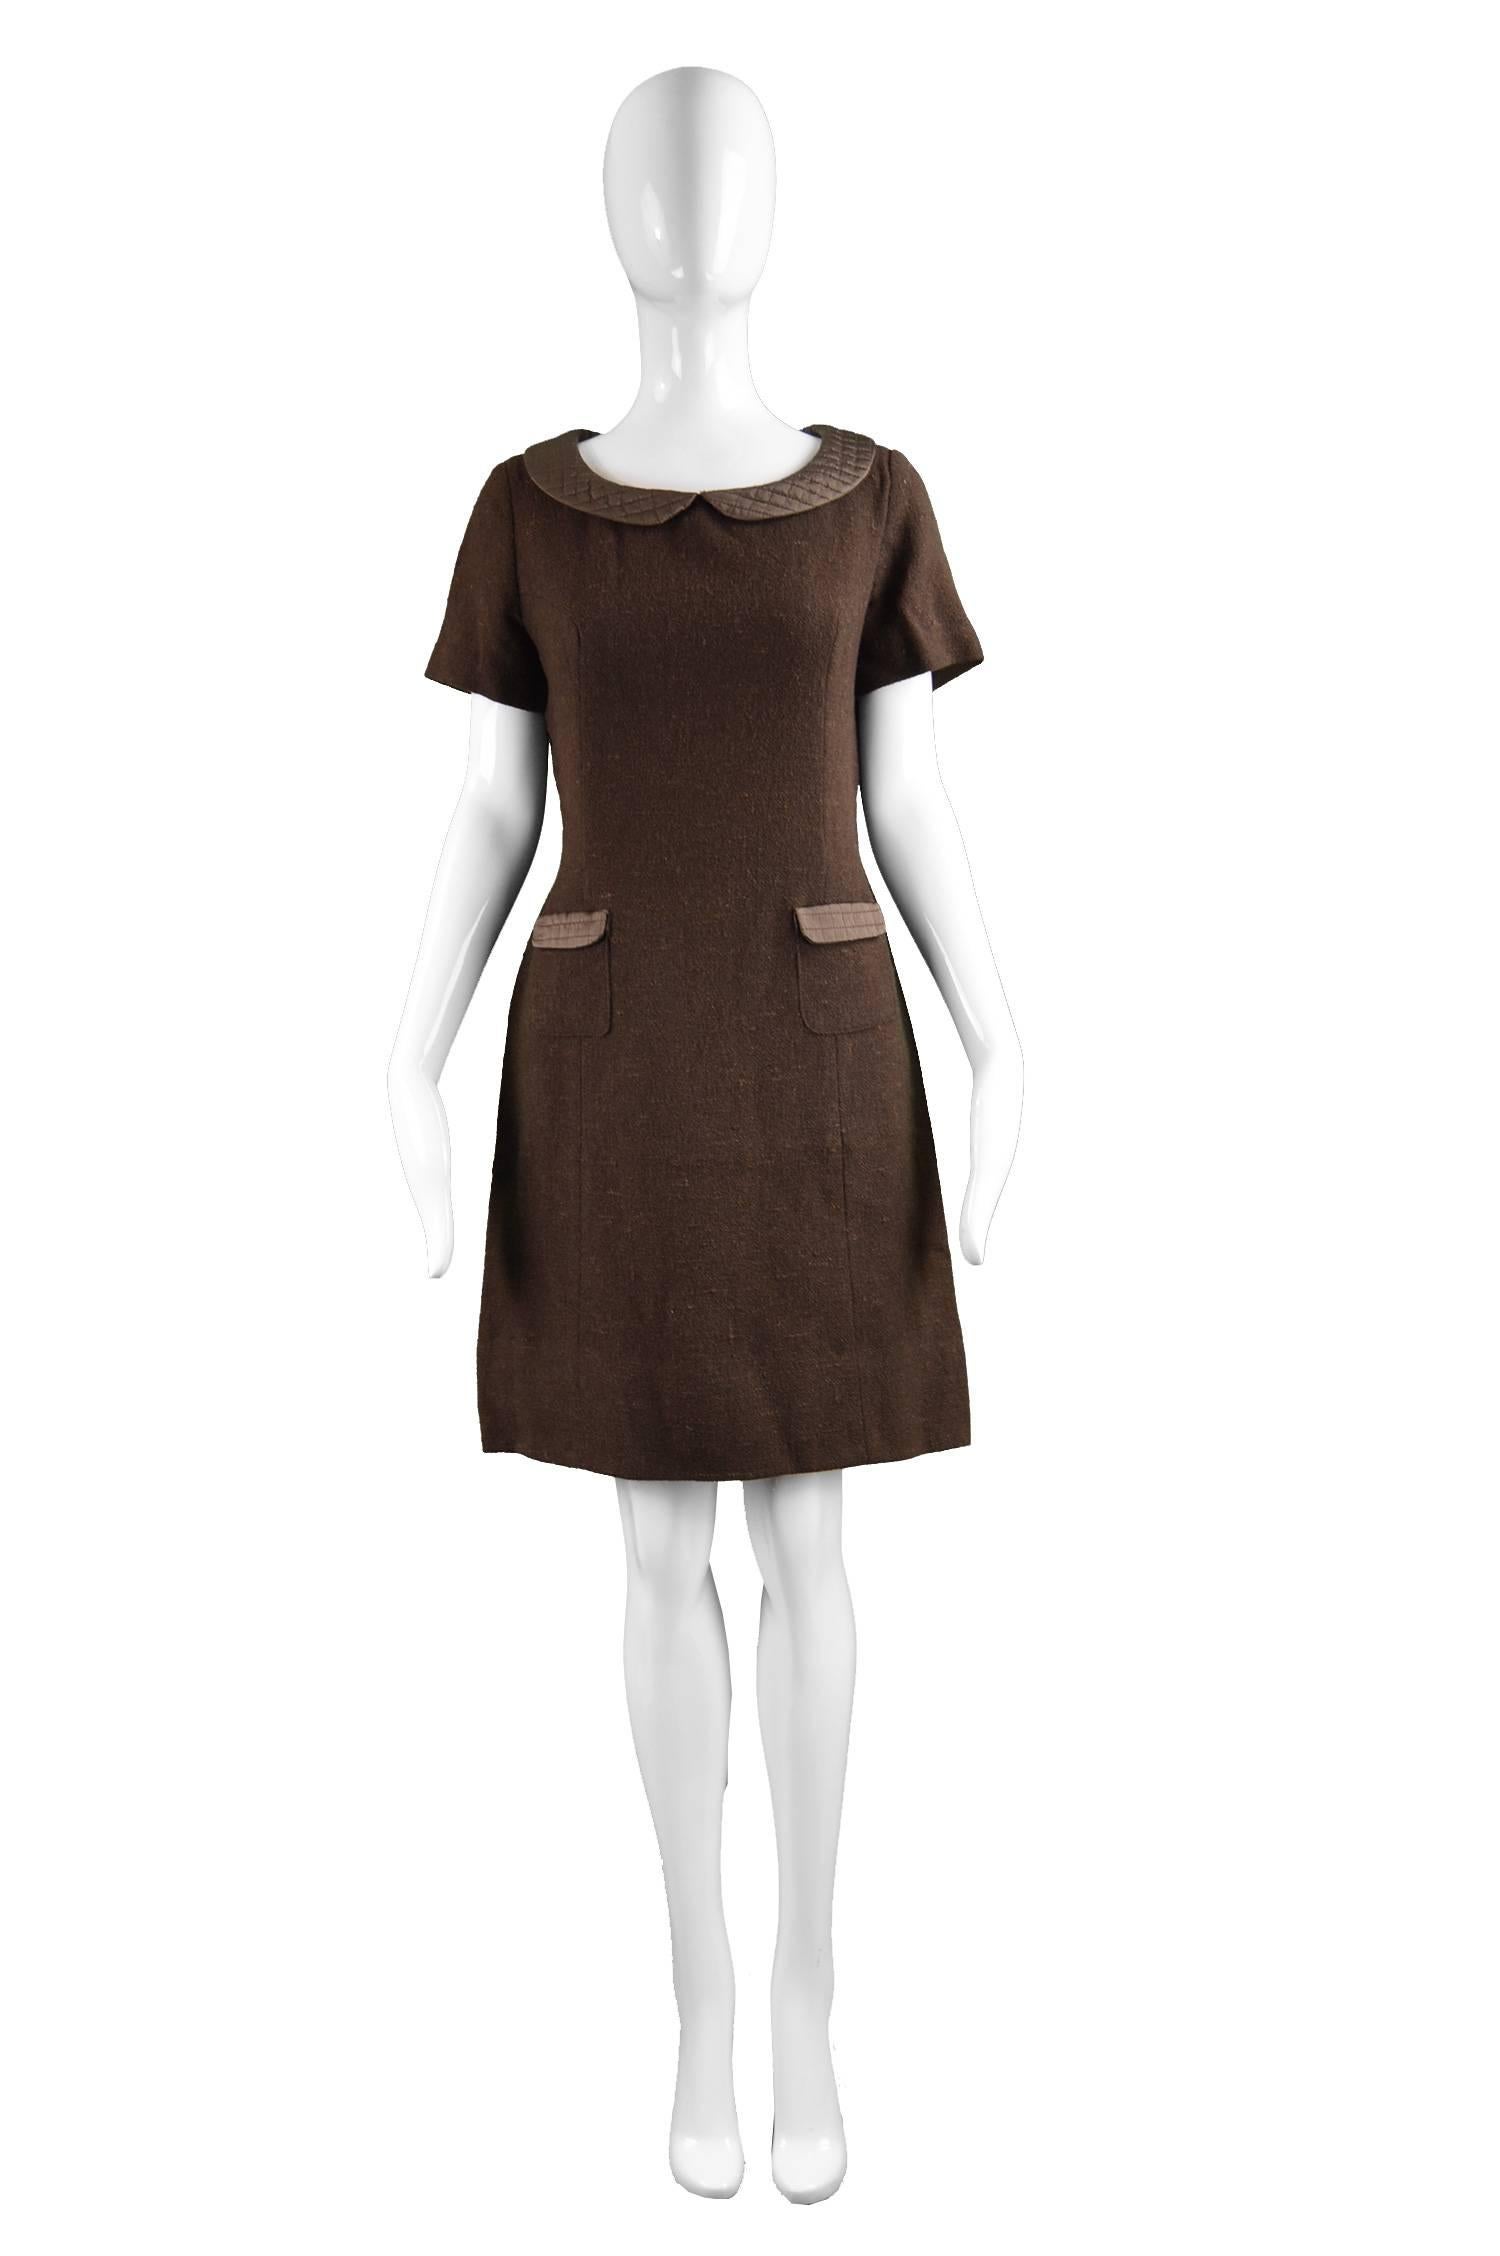 A chic vintage women's dress from the 60s by high quality ready to wear label, Marcel Fenez. In a brown woven wool with matelassé quilting on the pockets and peter pan style collar which gives a playful mod touch. With simple and elegant tailored